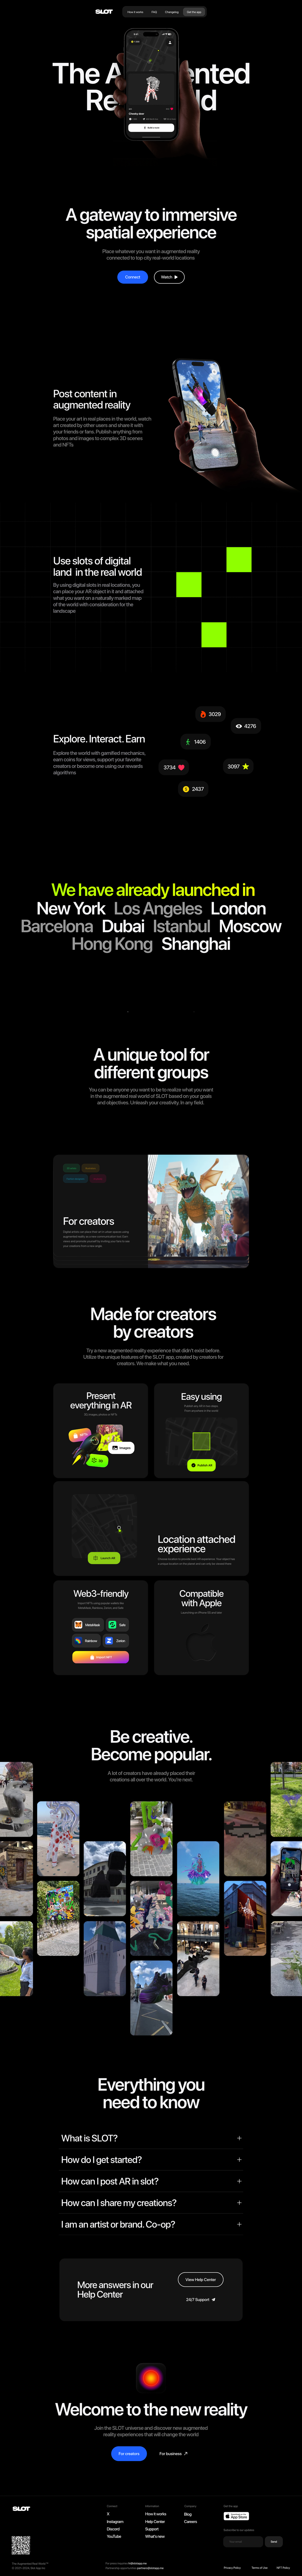 SLOT Landing Page Example: A new augmented reality social app. Place whatever you want in augmented reality connected to real-world locations. We provide a gateway immersive spatial experience tool for digital creators, investors, and explorers.